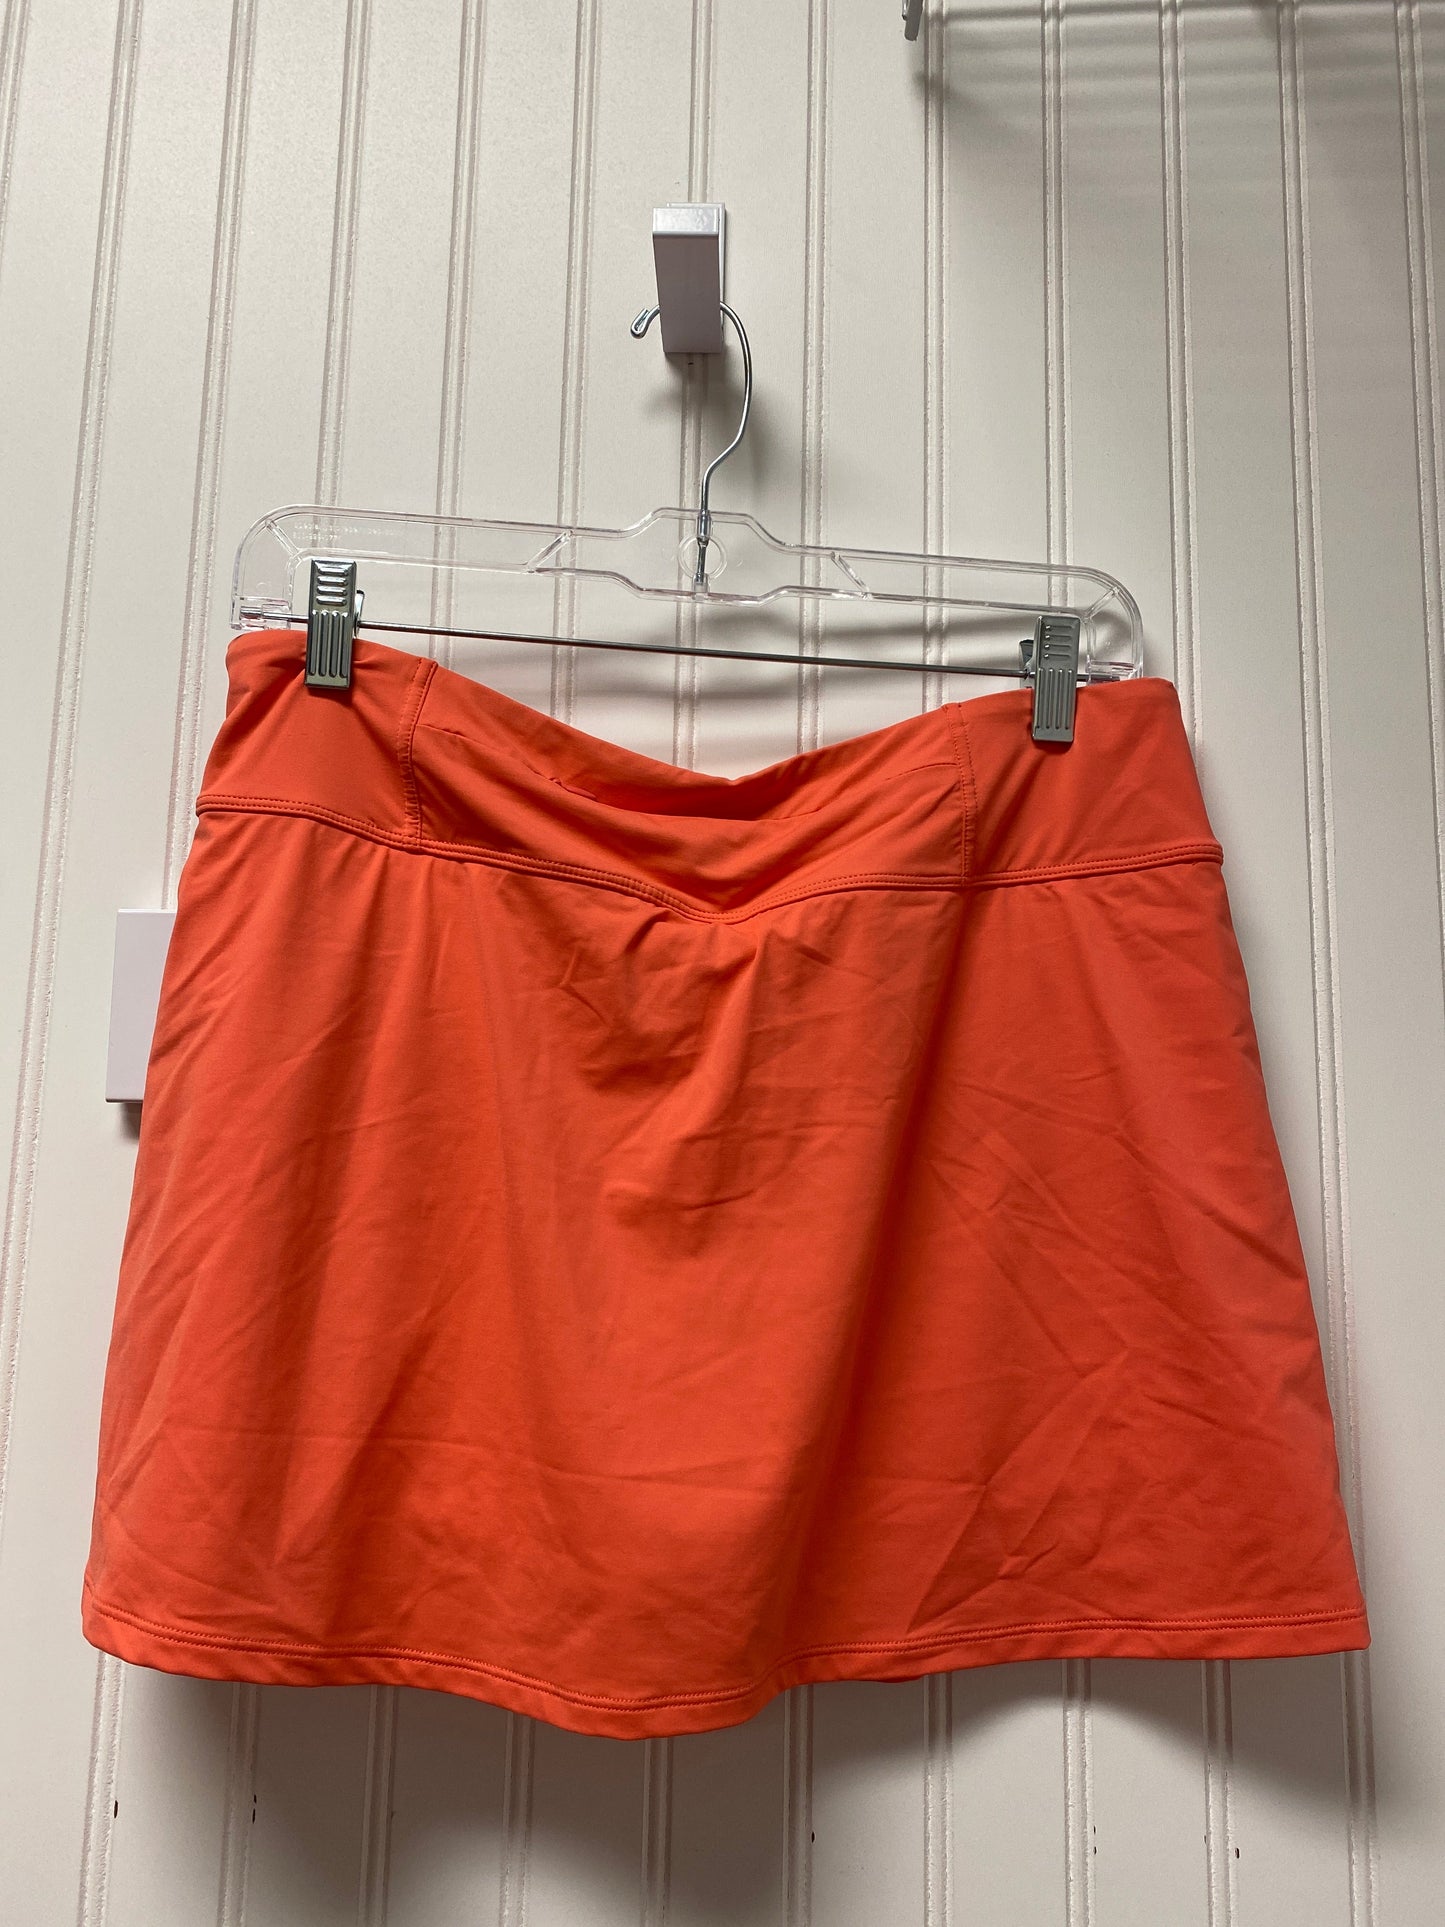 Peach Athletic Skirt Tommy Bahama, Size L